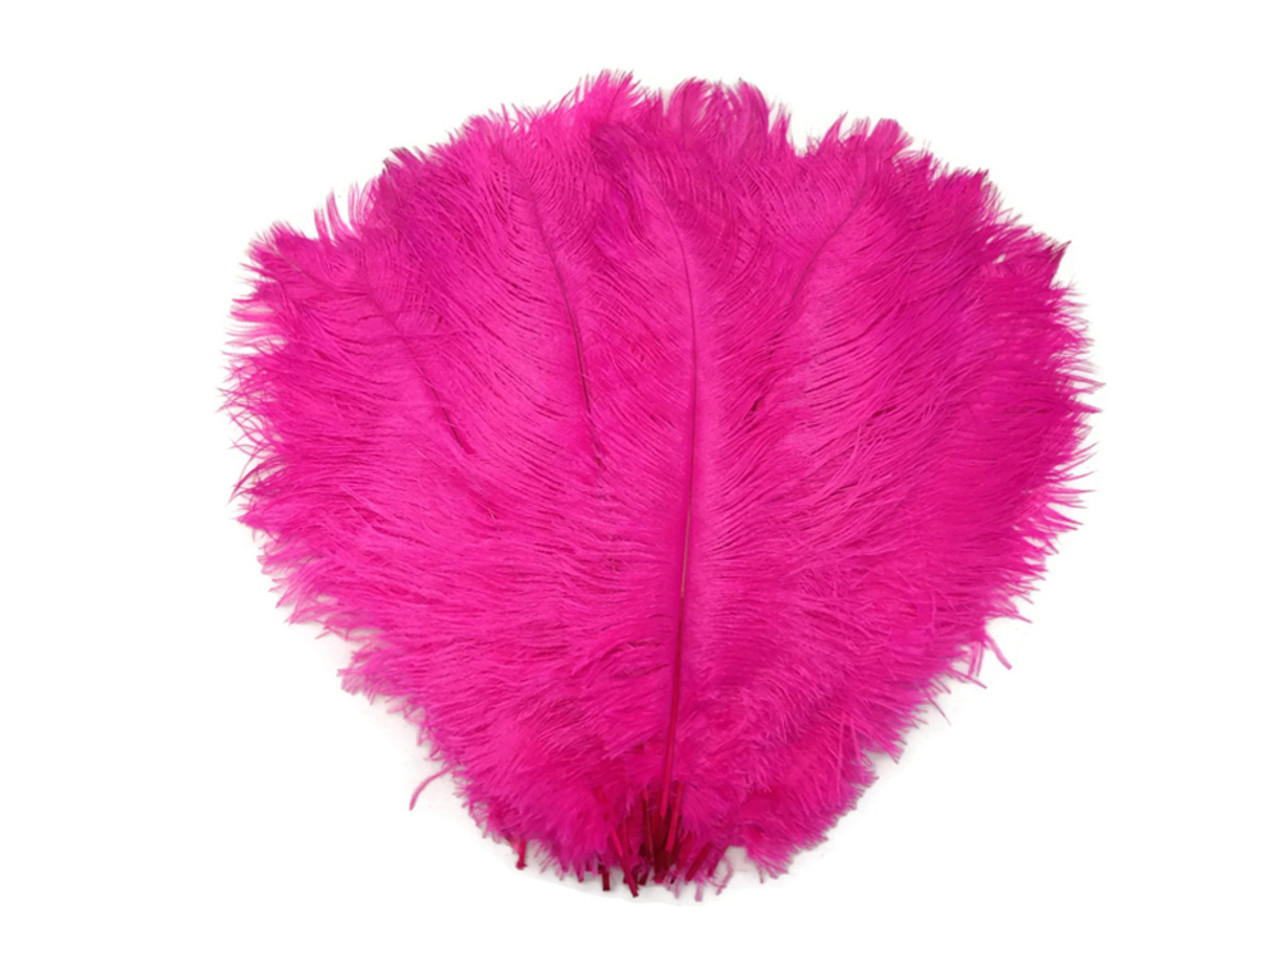 Hot Pink Ostrich Feather 8-12 inch size per Each